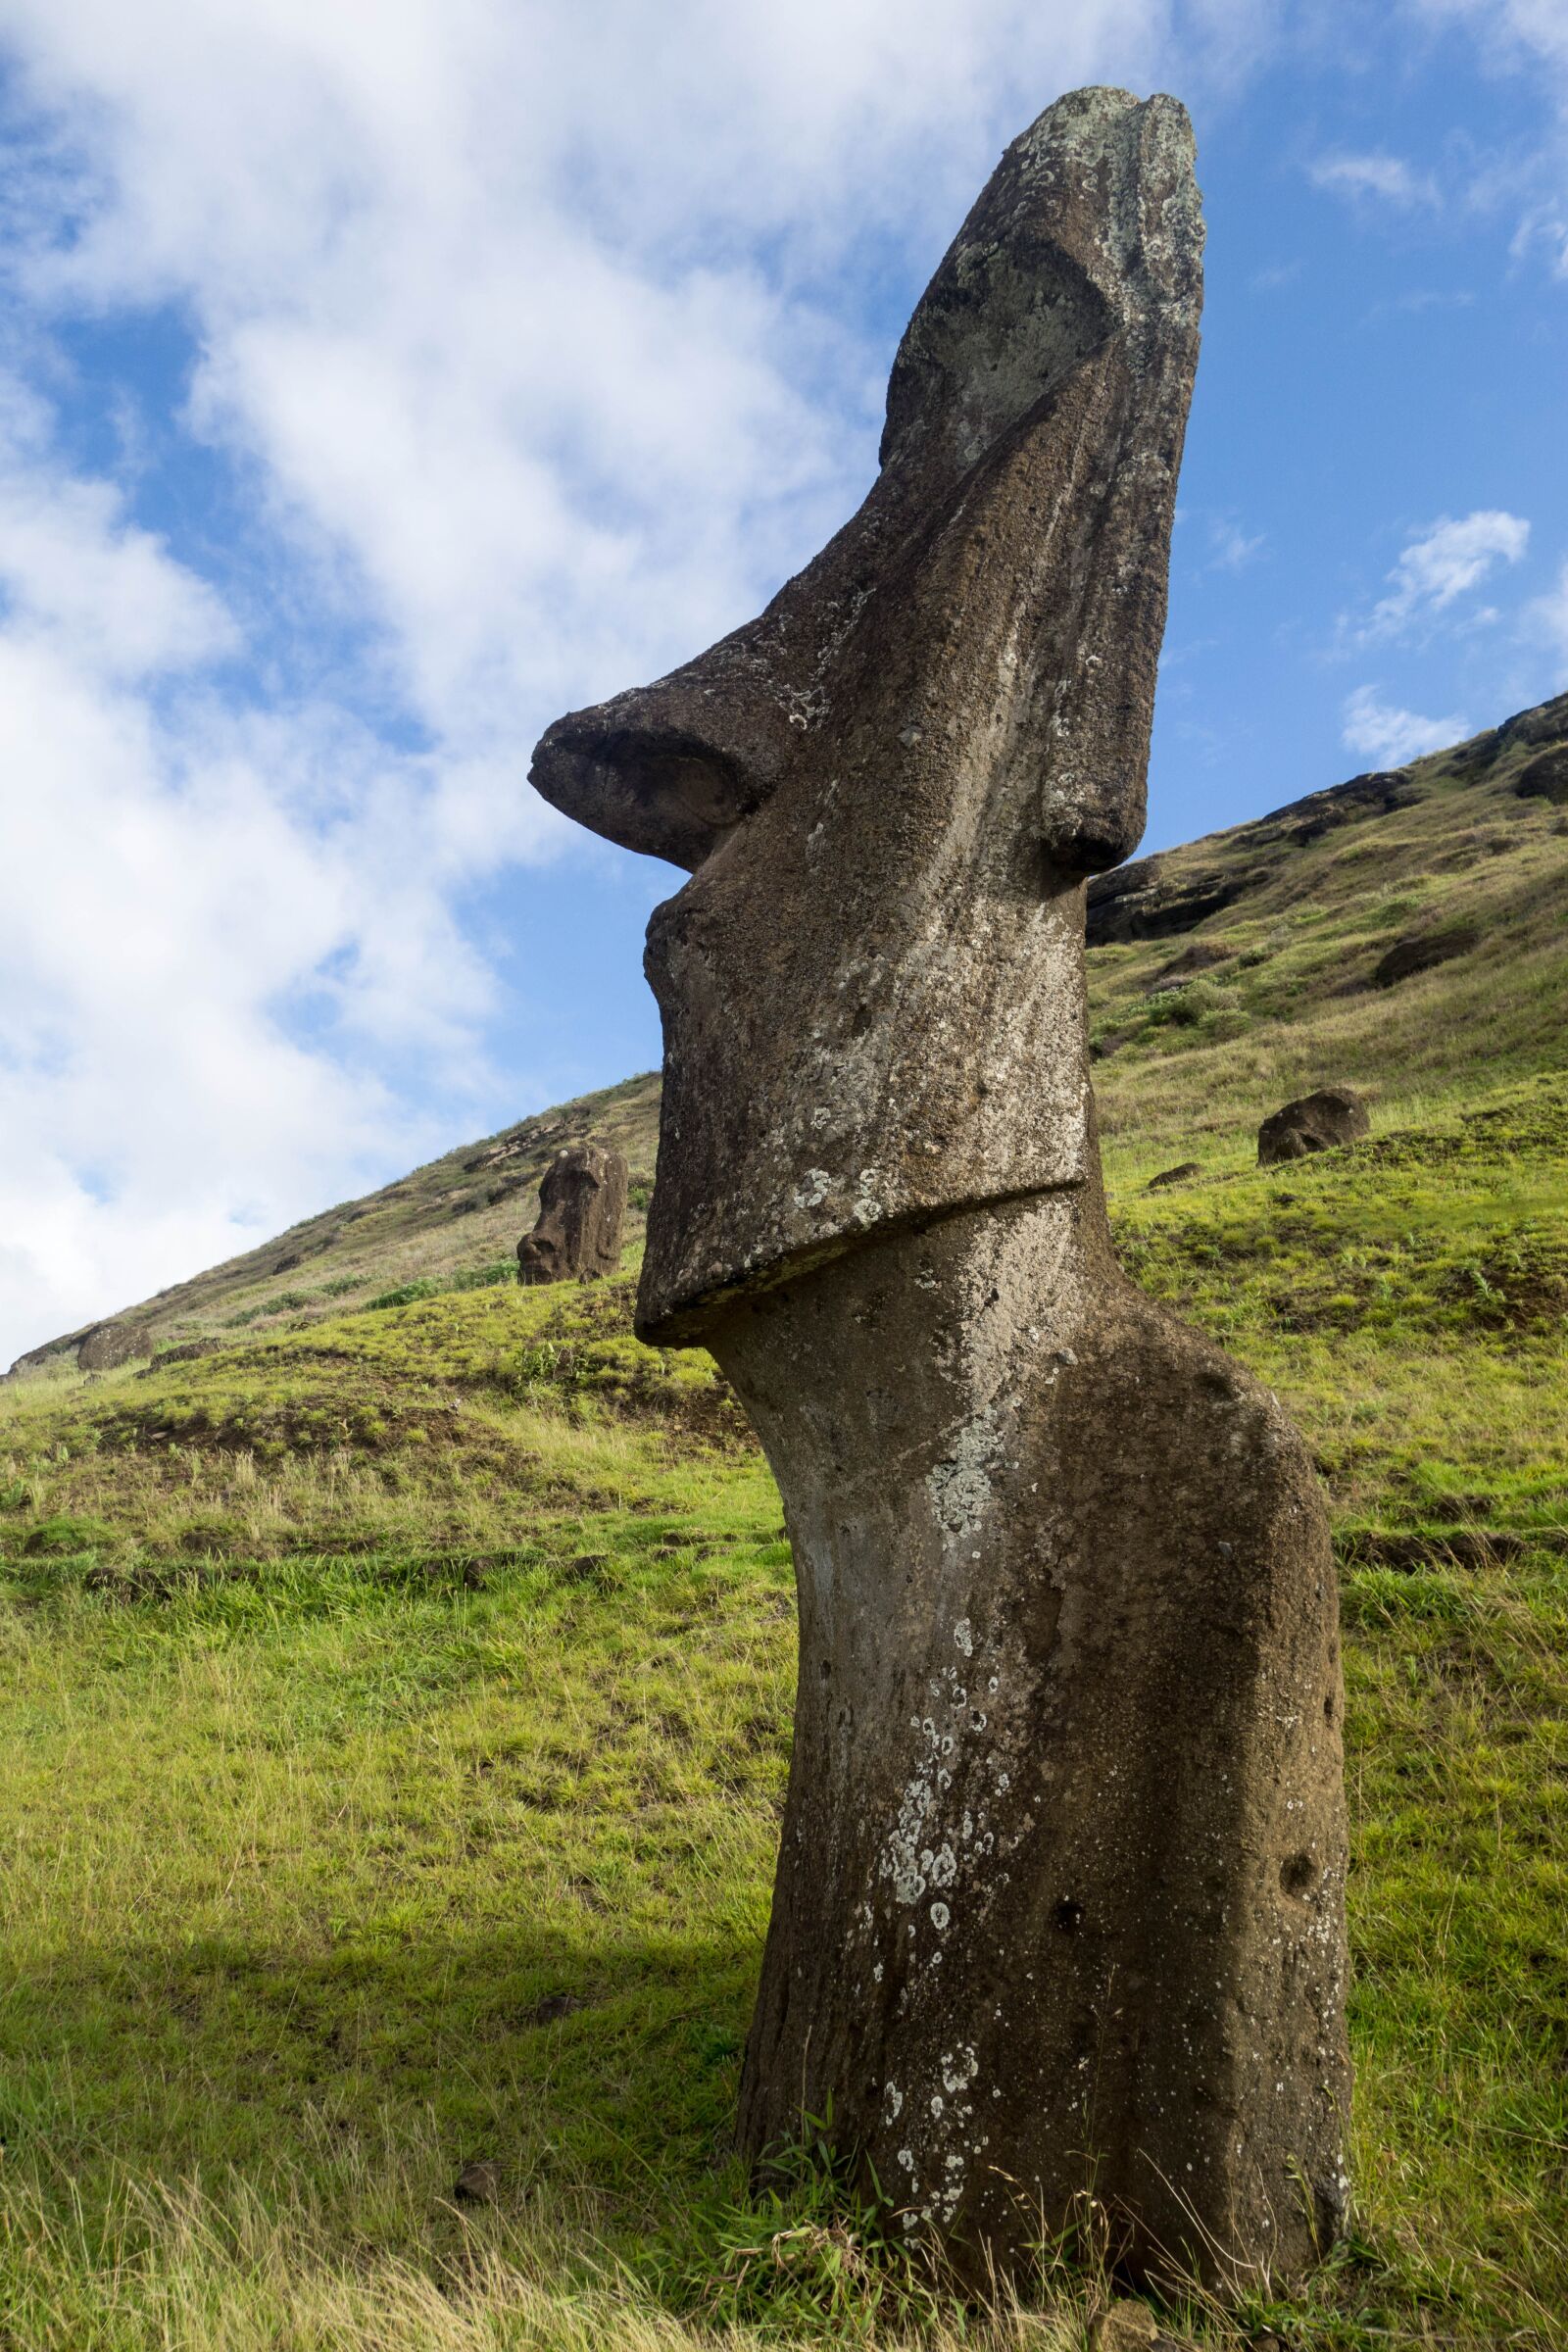 Sony Cyber-shot DSC-RX100 II sample photo. Easter, easter island, travel photography